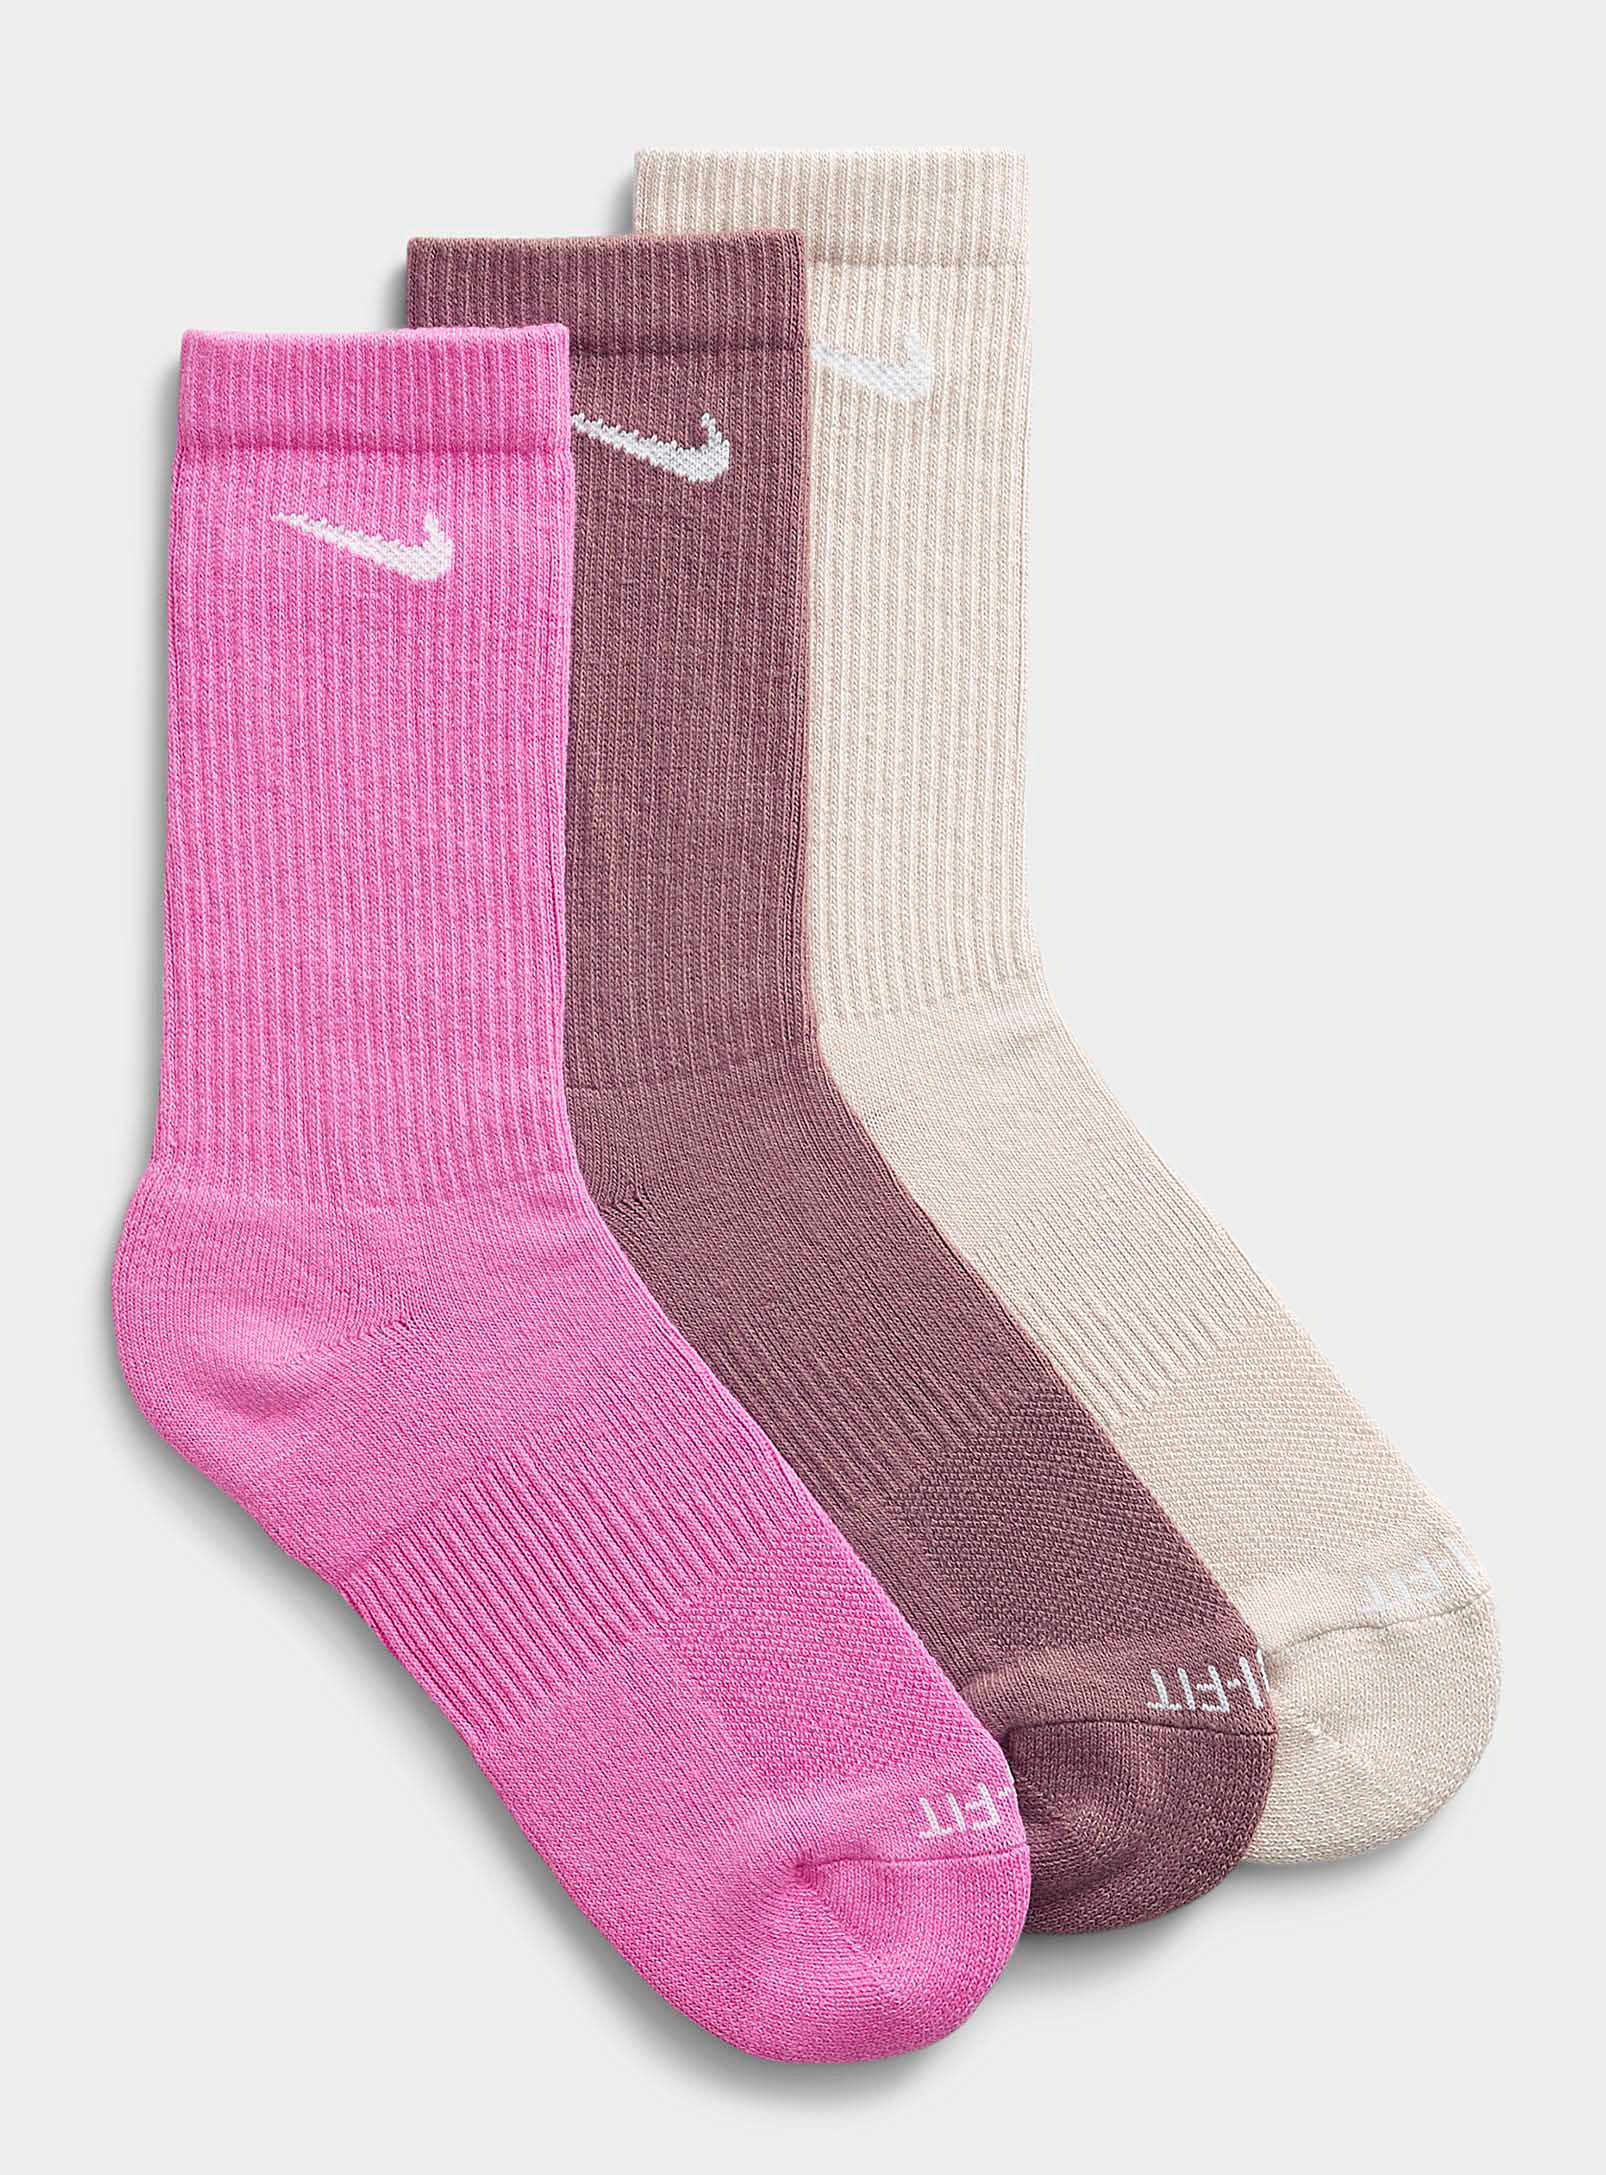 Nike Everyday Plus Colourful Socks Set Of 3 In Pink